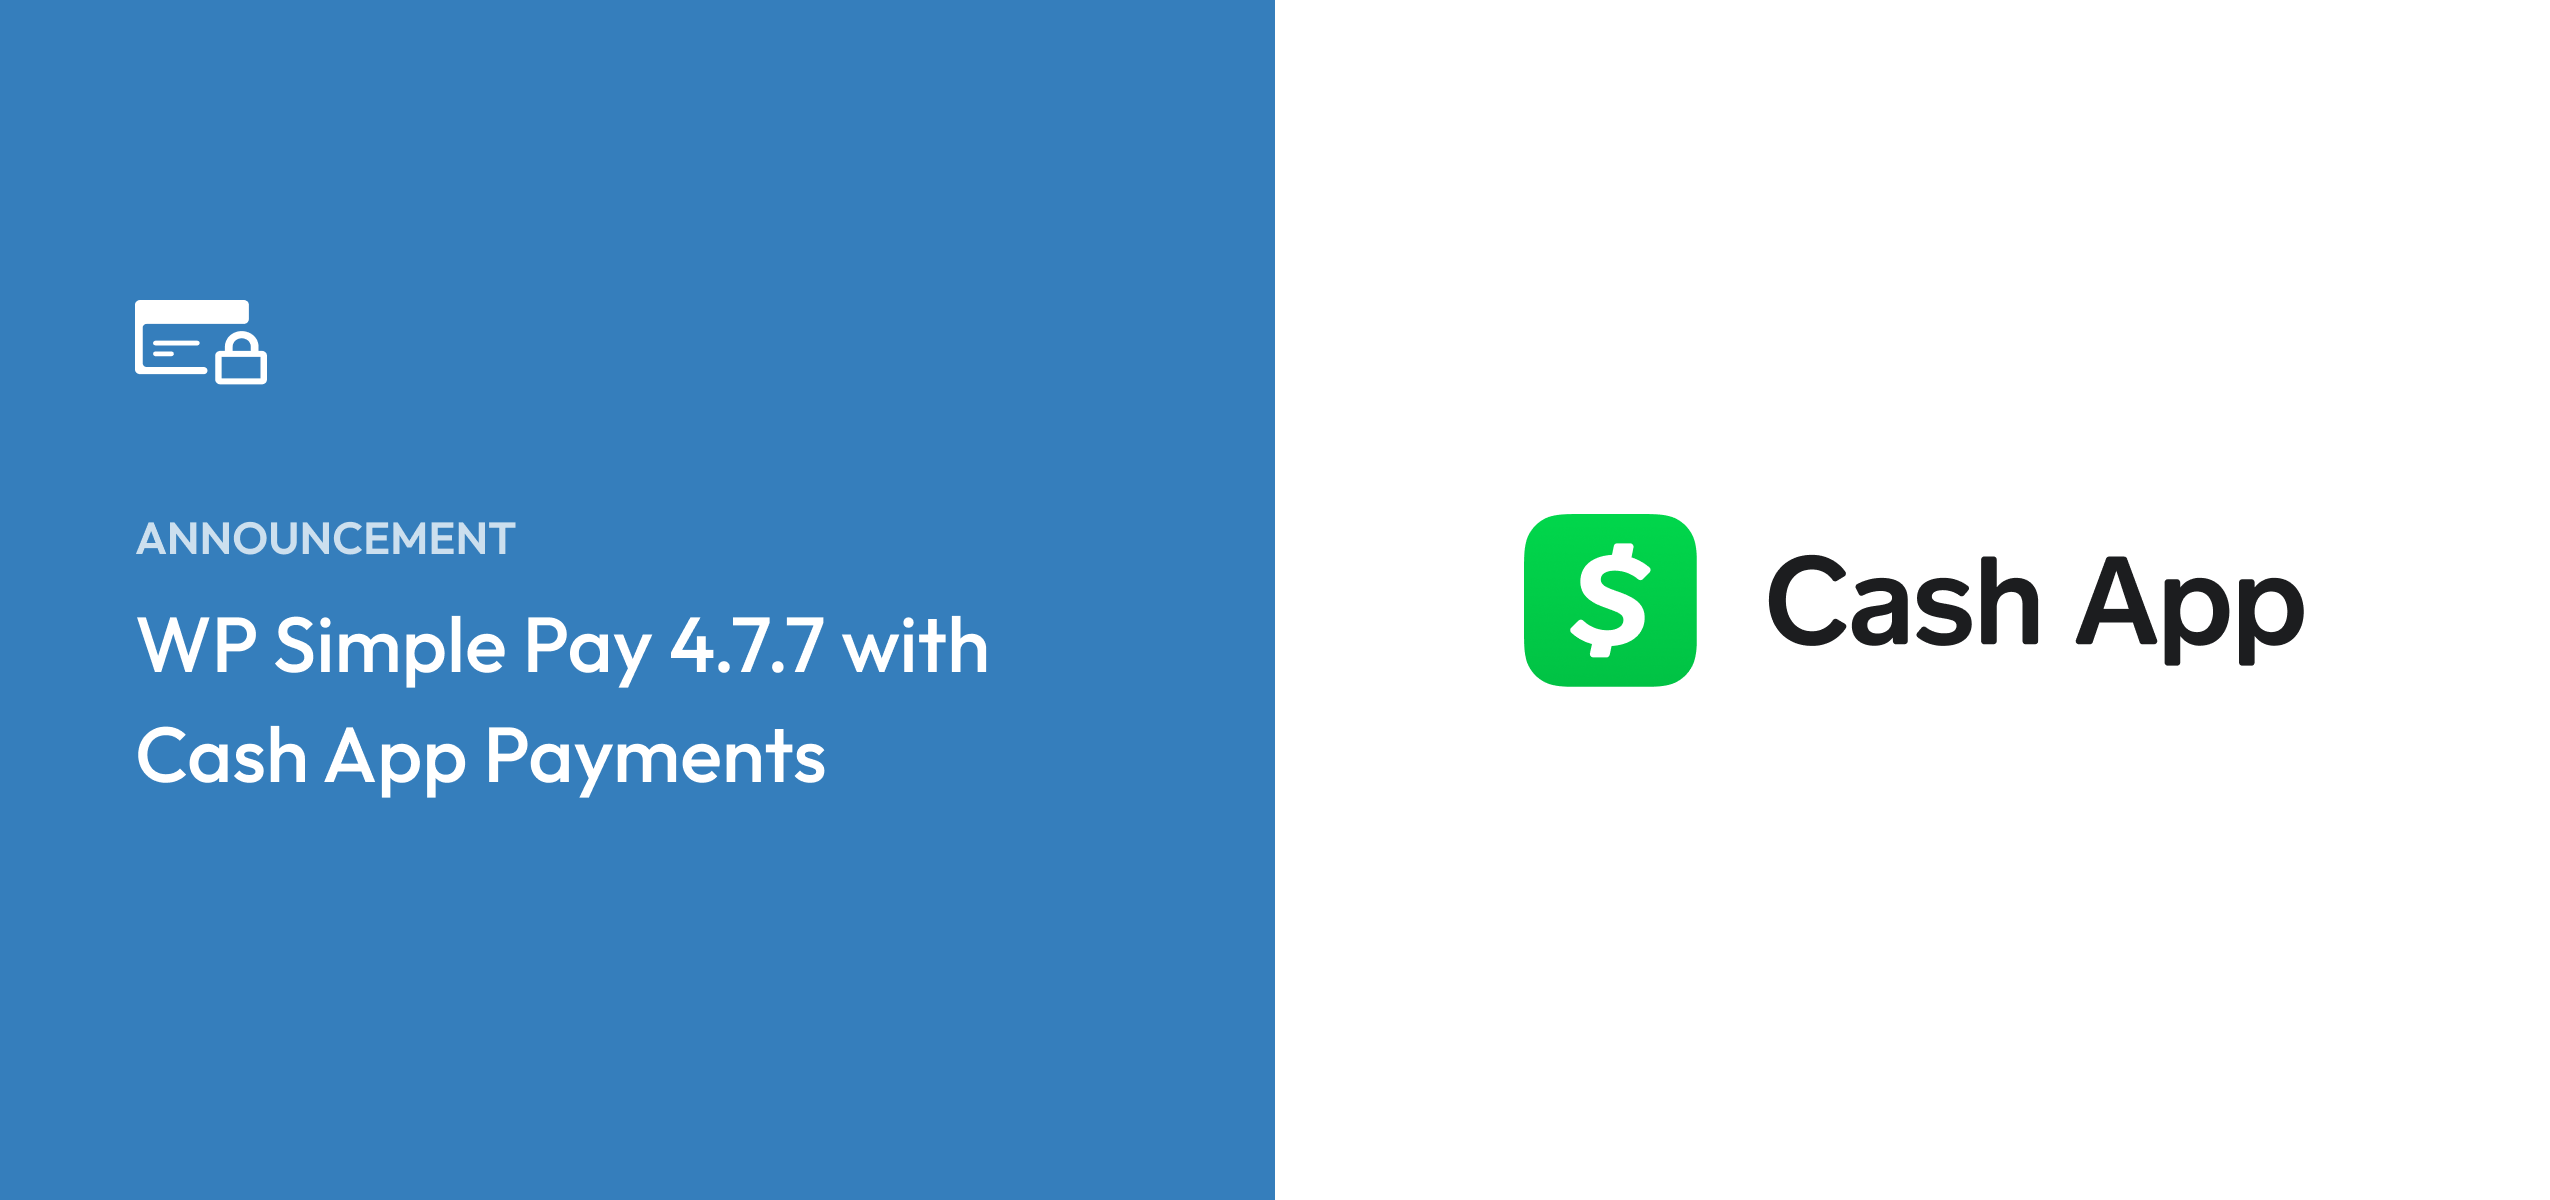 [New] Introducing WP Simple Pay 4.7.7 with Cash App Pay and More